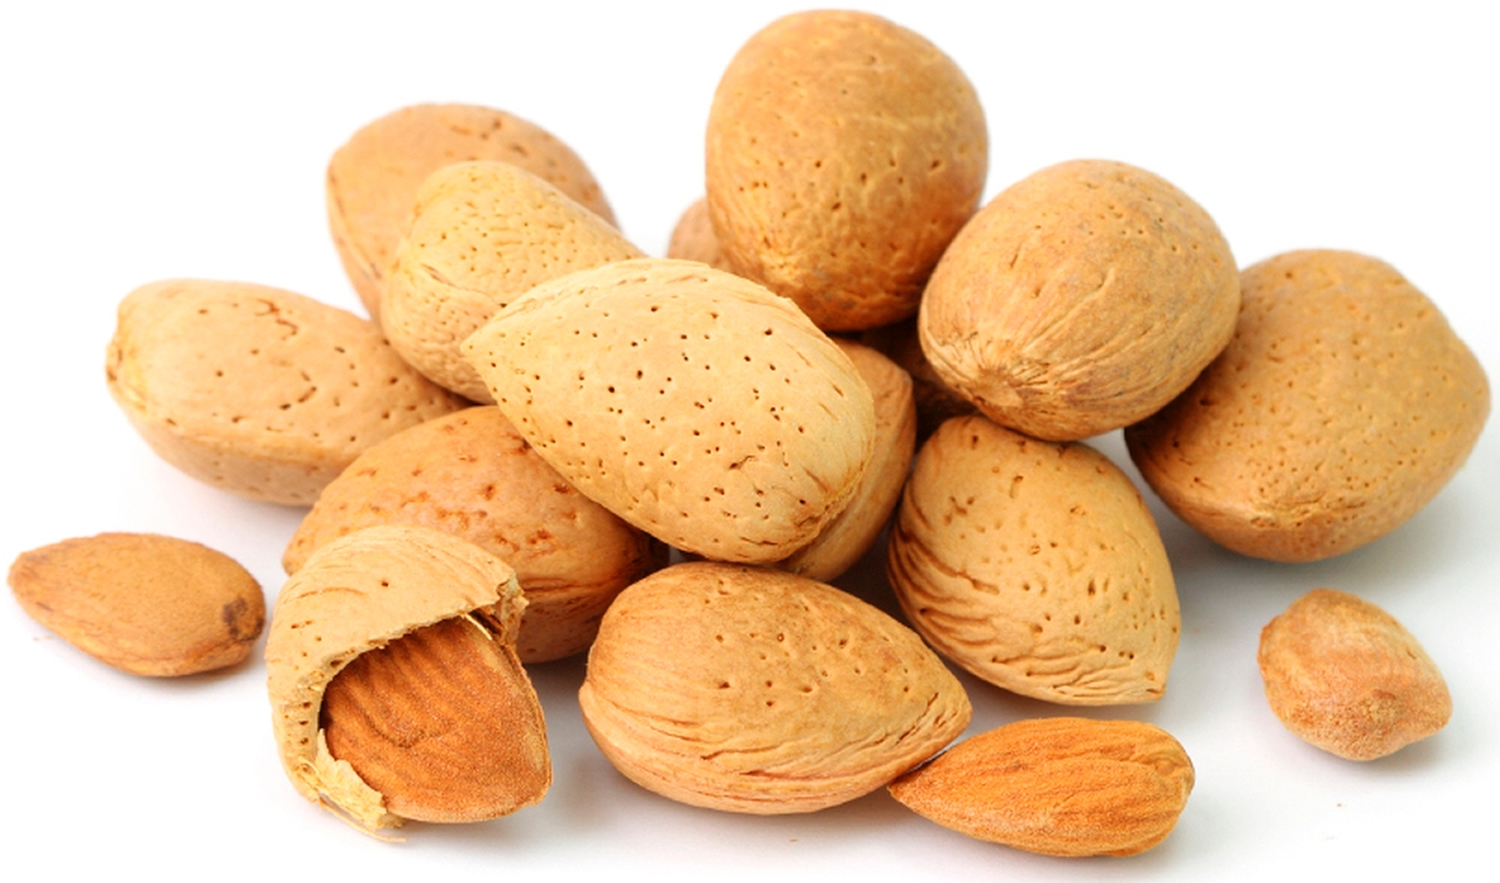 almonds in shell